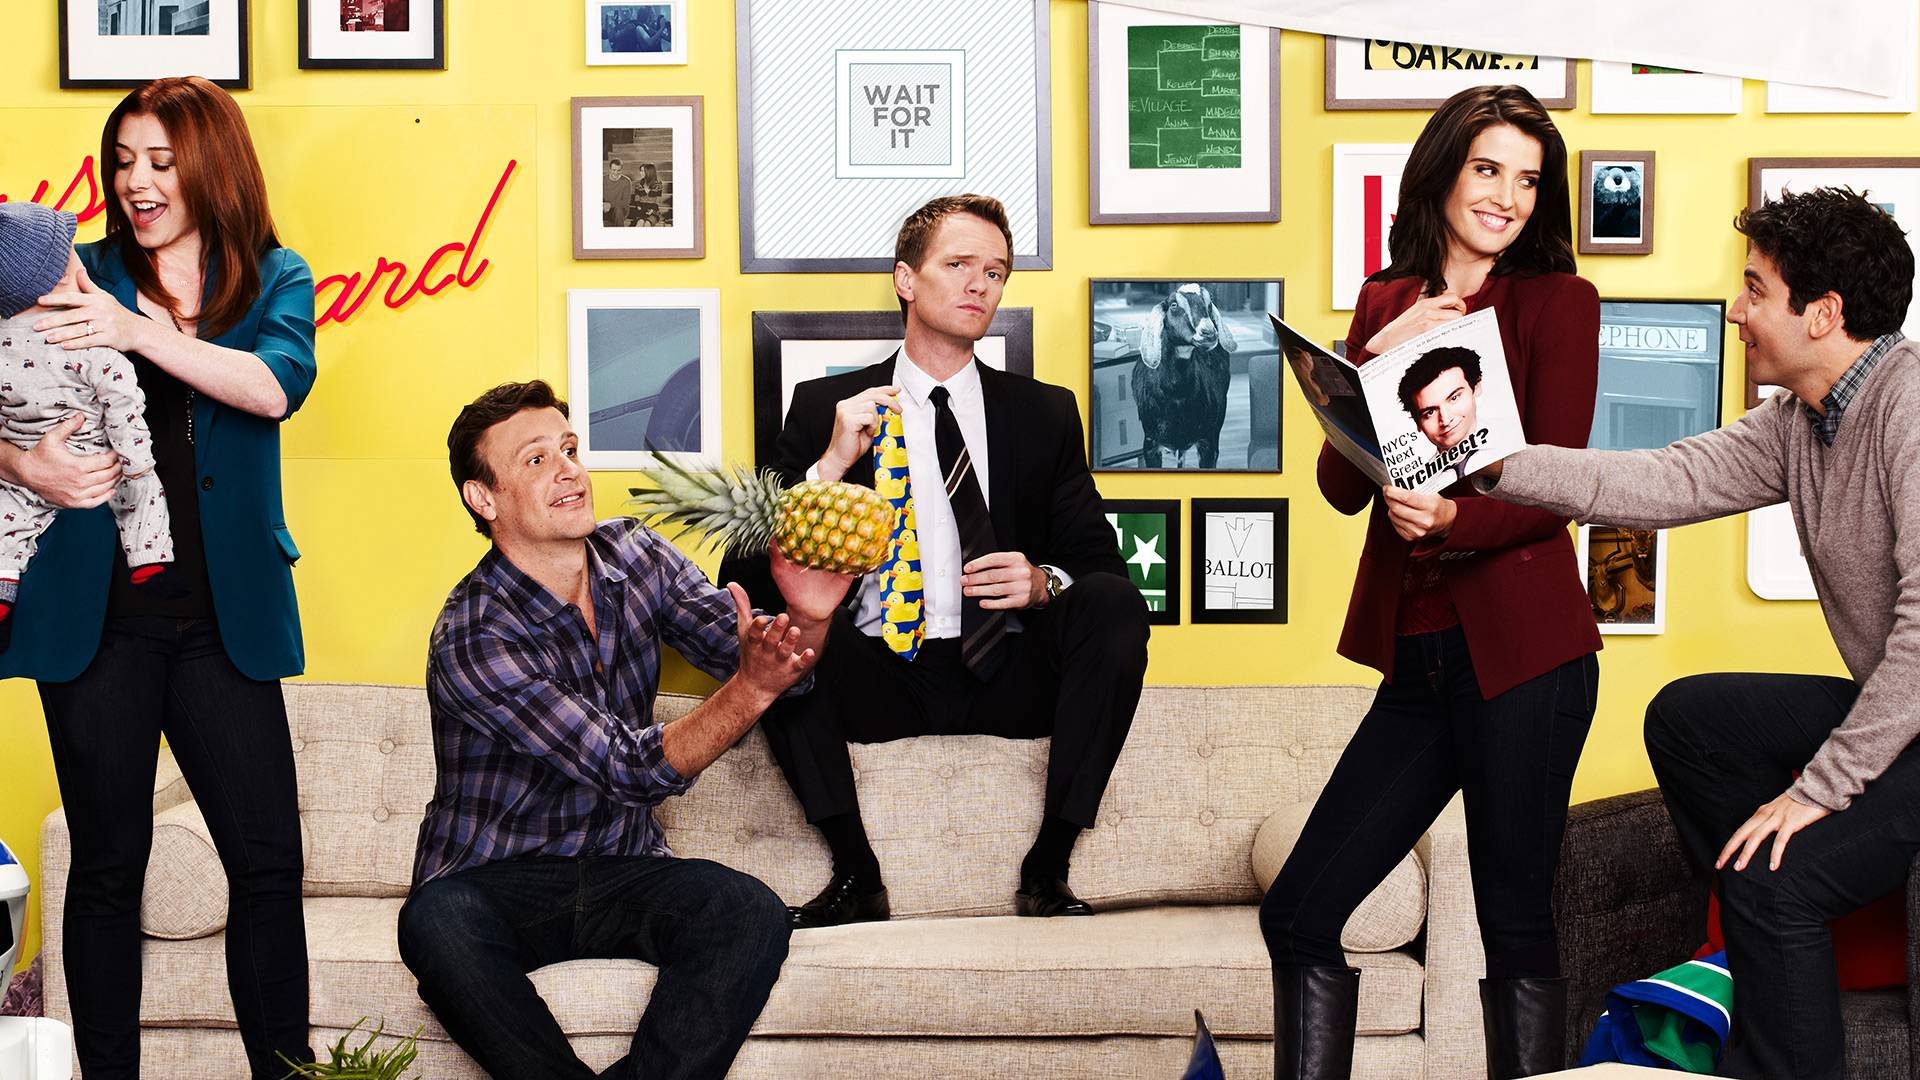 how i met your mother, Comedy, Sitcom, Series, Television, How, Met, Mother,  1 Wallpaper